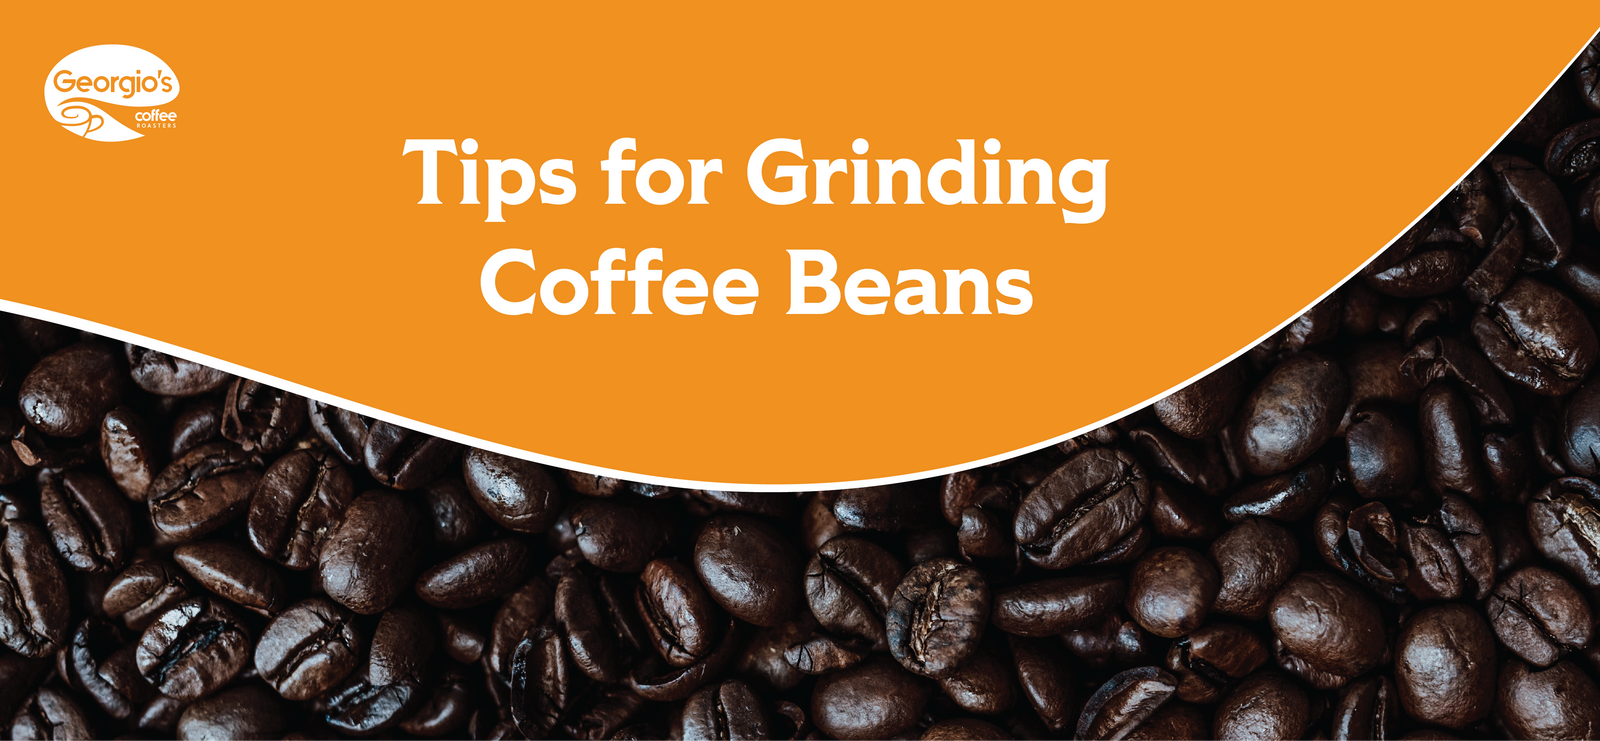 tips for grinding coffee beans, how to grind coffee beans